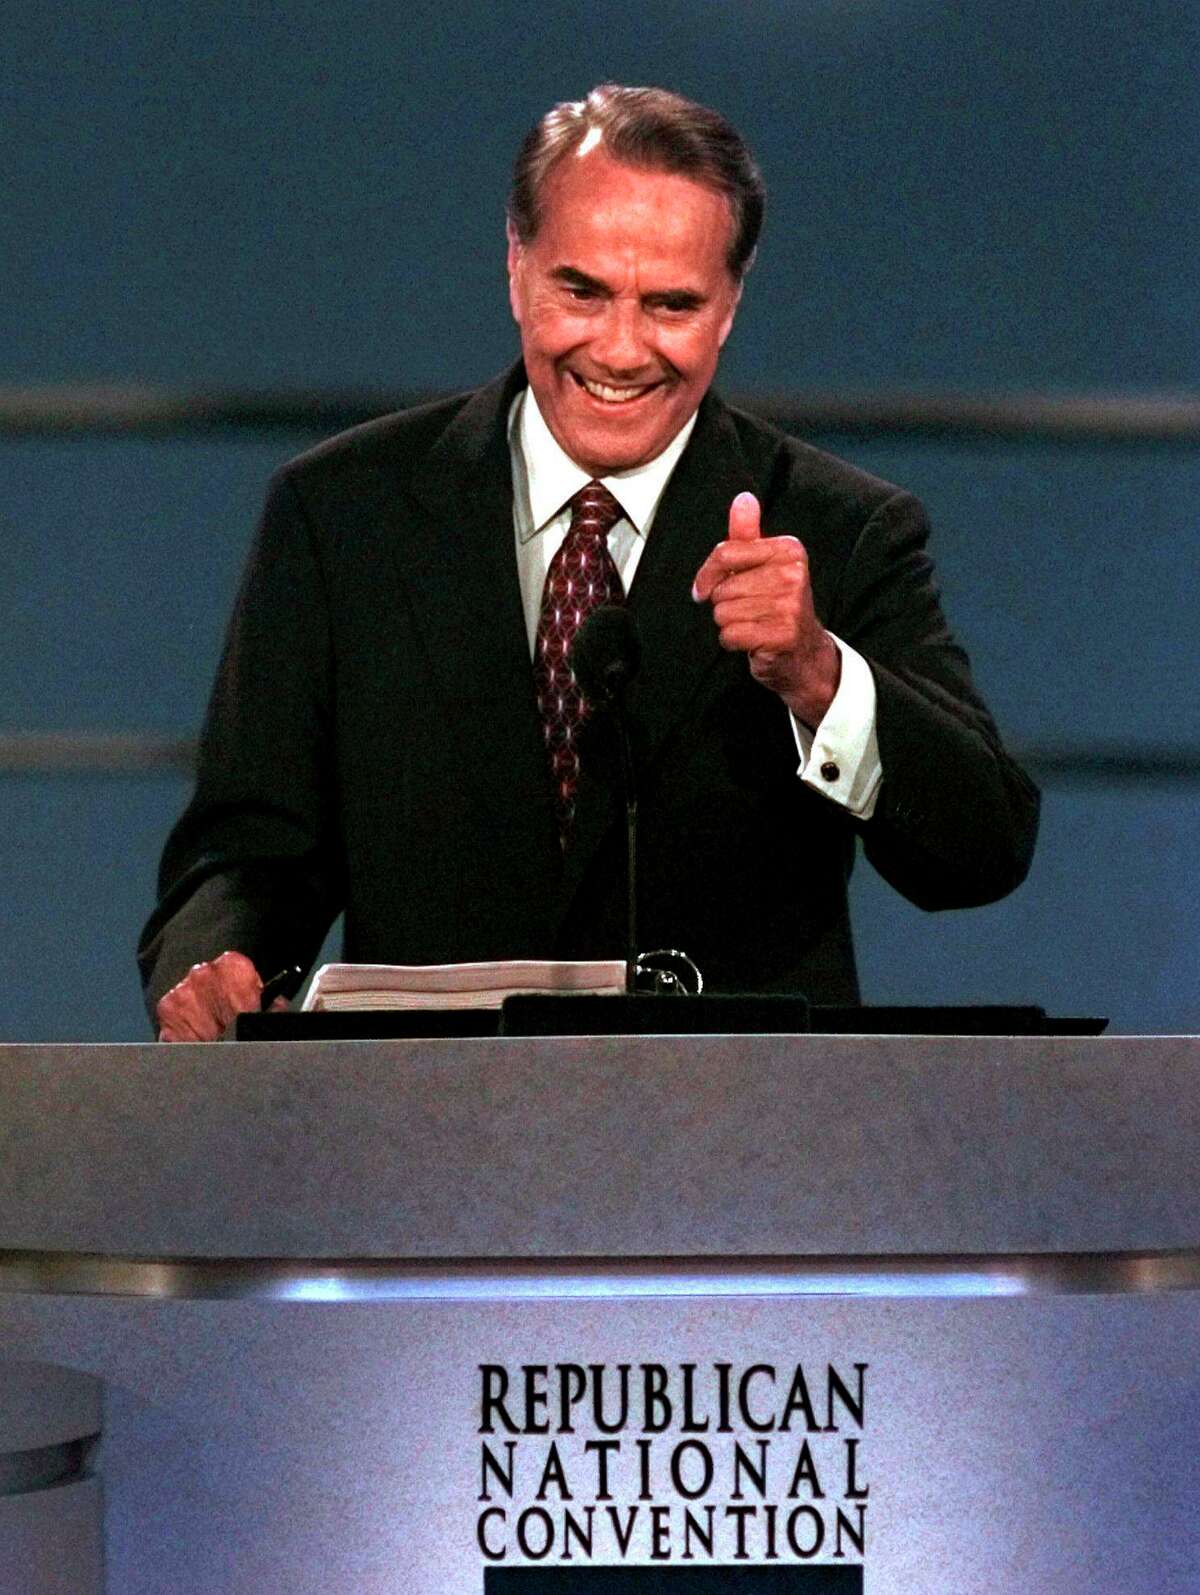 FILE - Republican presidential nominee Bob Dole stands before the Republican National Convention, in San Diego, Aug. 15, 1996. Offering himself as a man tested by adversity, made sensitive by hardship, Dole accepted the Republican presidential nomination Thursday night with a scorching indictment of the Clinton administration and vowing a return to heartland values of faith and trust. (AP Photo/Ron Edmonds, File)